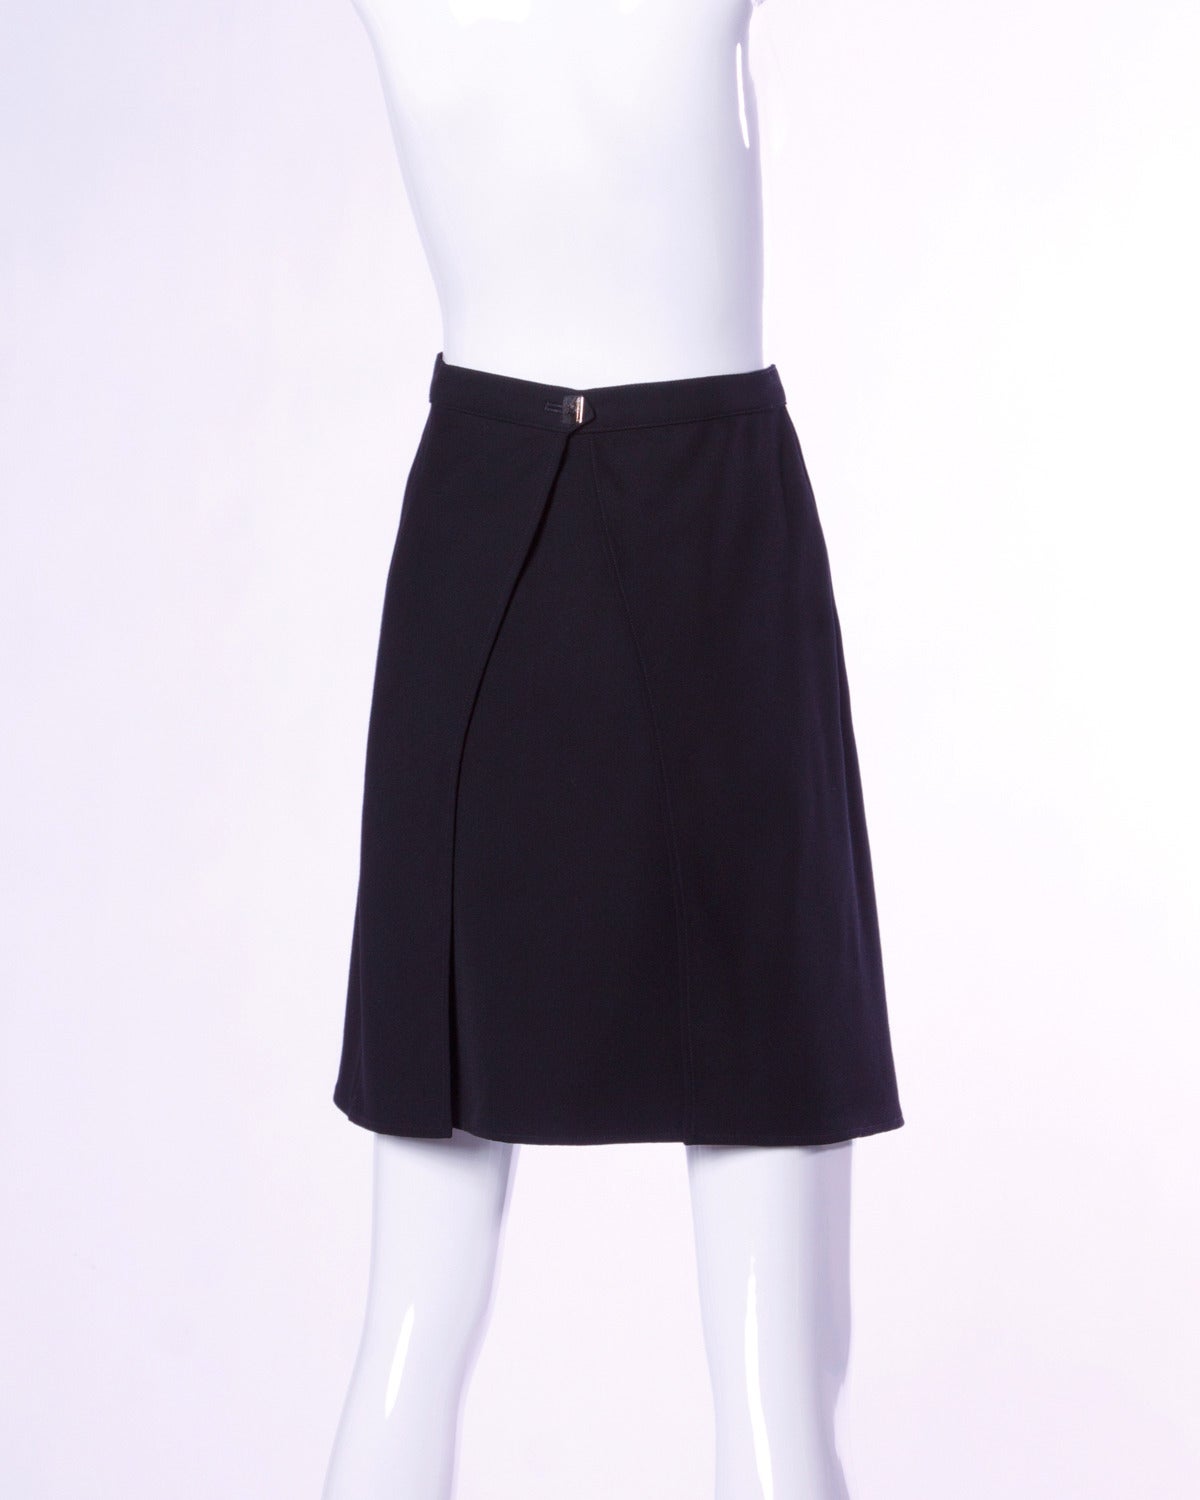 Simple and chic black wool skirt by Karl Lagerfeld with back flap detail and Lagerfeld button. 

Details:

Unlined
Side Snap and Back Button Closure
Marked Size: 40
Color: Black
Fabric: Wool
Label: Karl Lagerfeld

Measurements:

Waist: